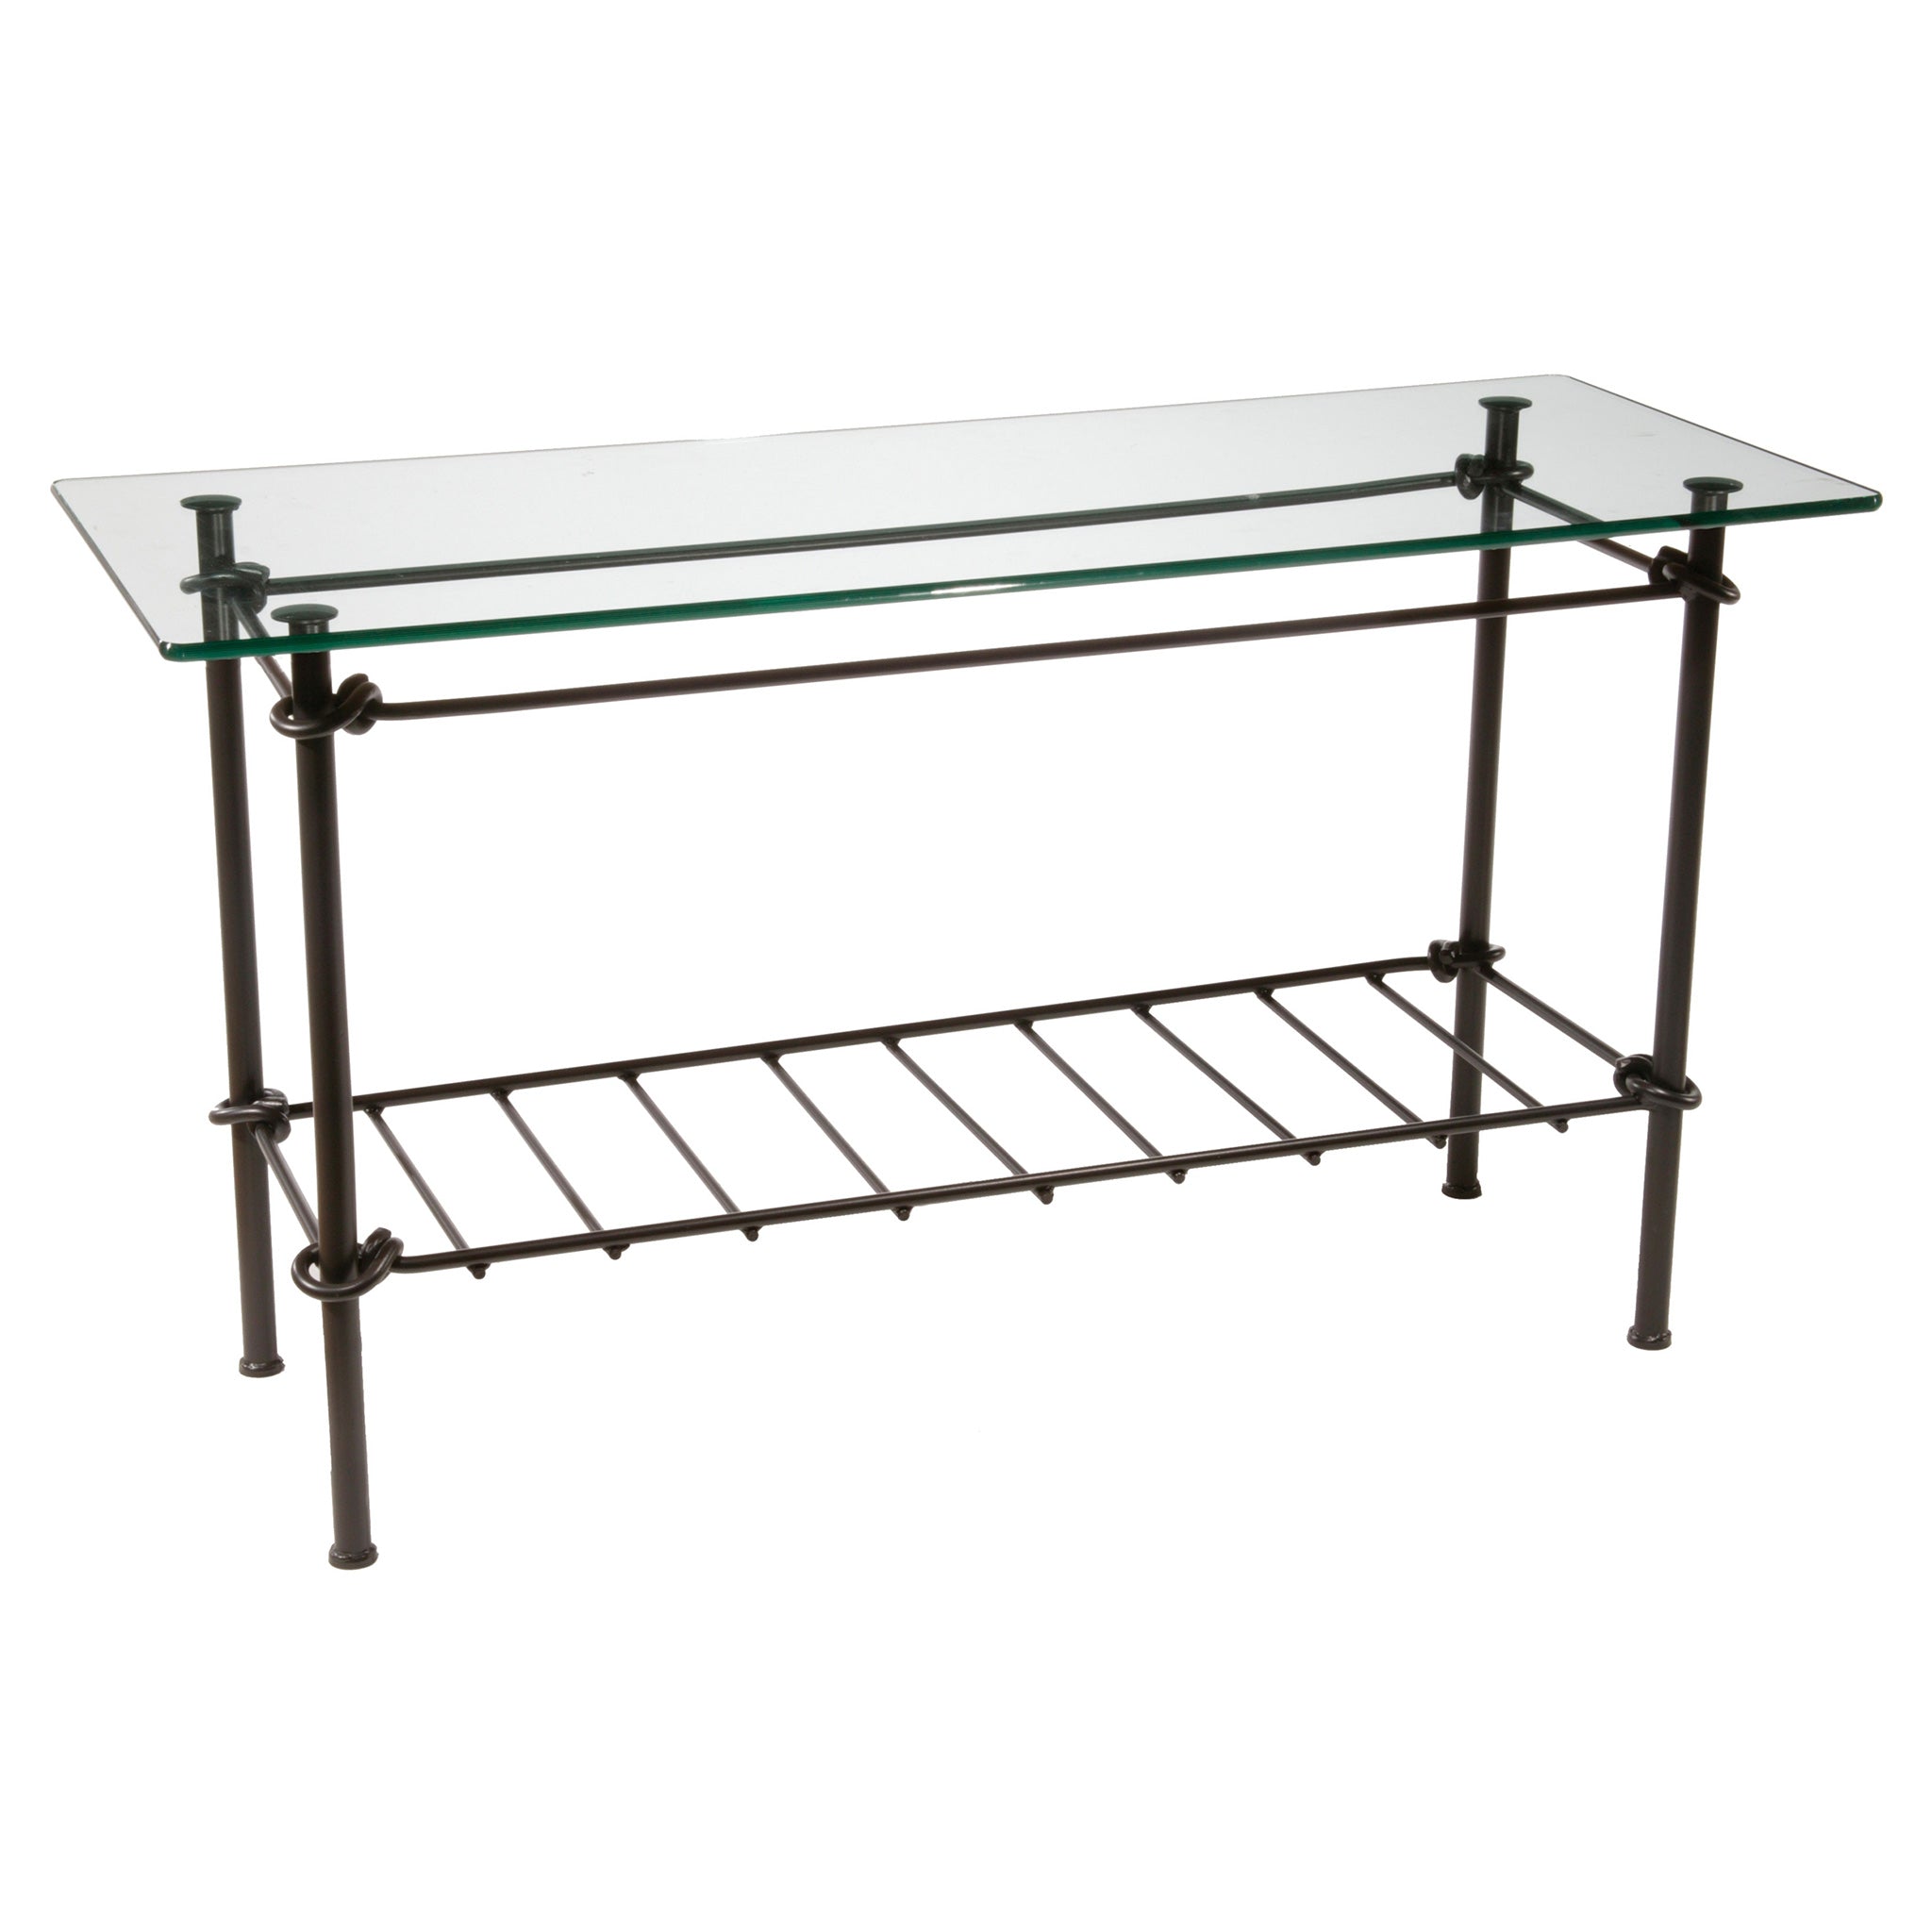 Wrought Iron Console Table Knot, Wrought Iron Console Table With Glass Top